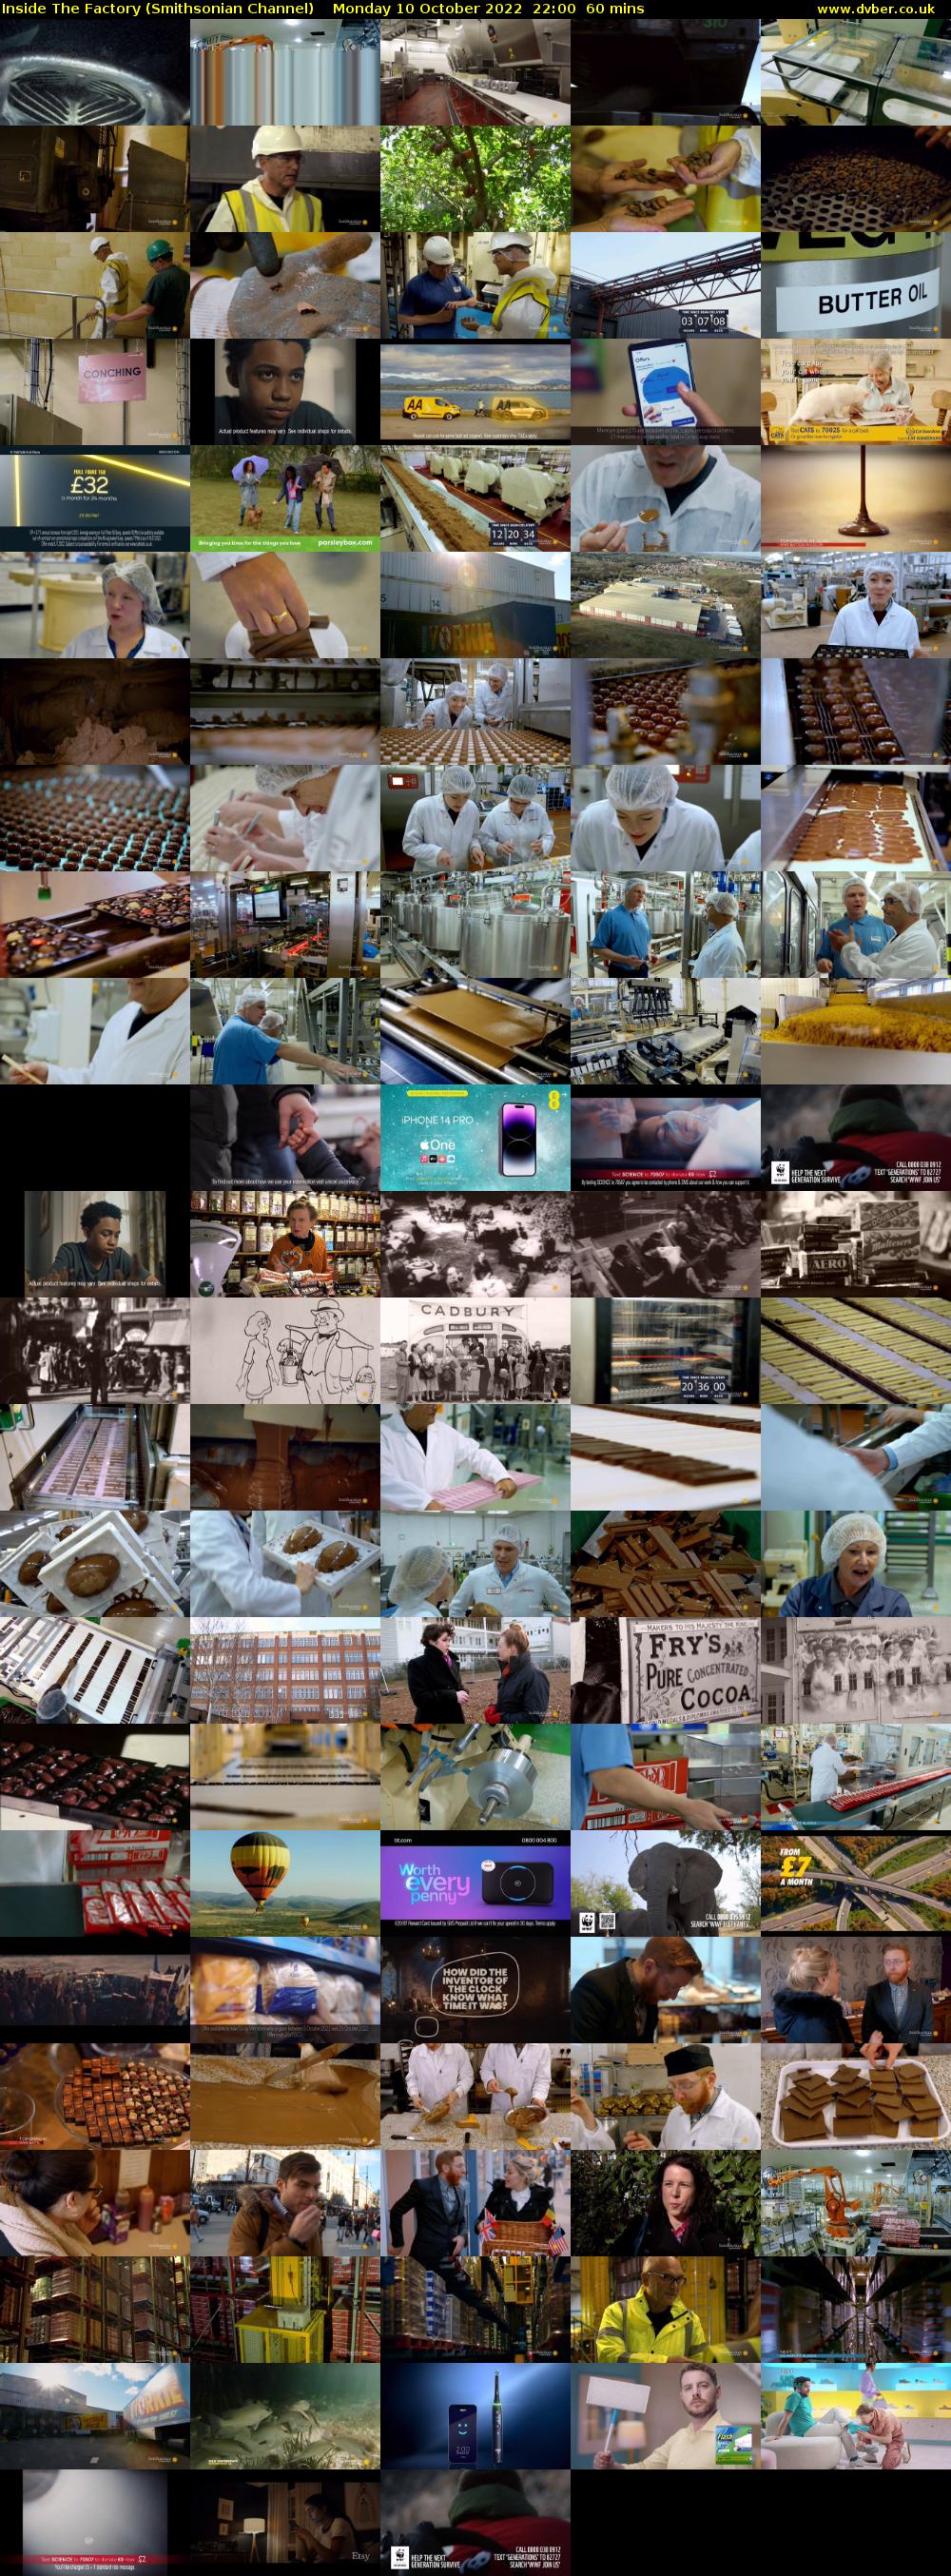 Inside The Factory (Smithsonian Channel) Monday 10 October 2022 22:00 - 23:00